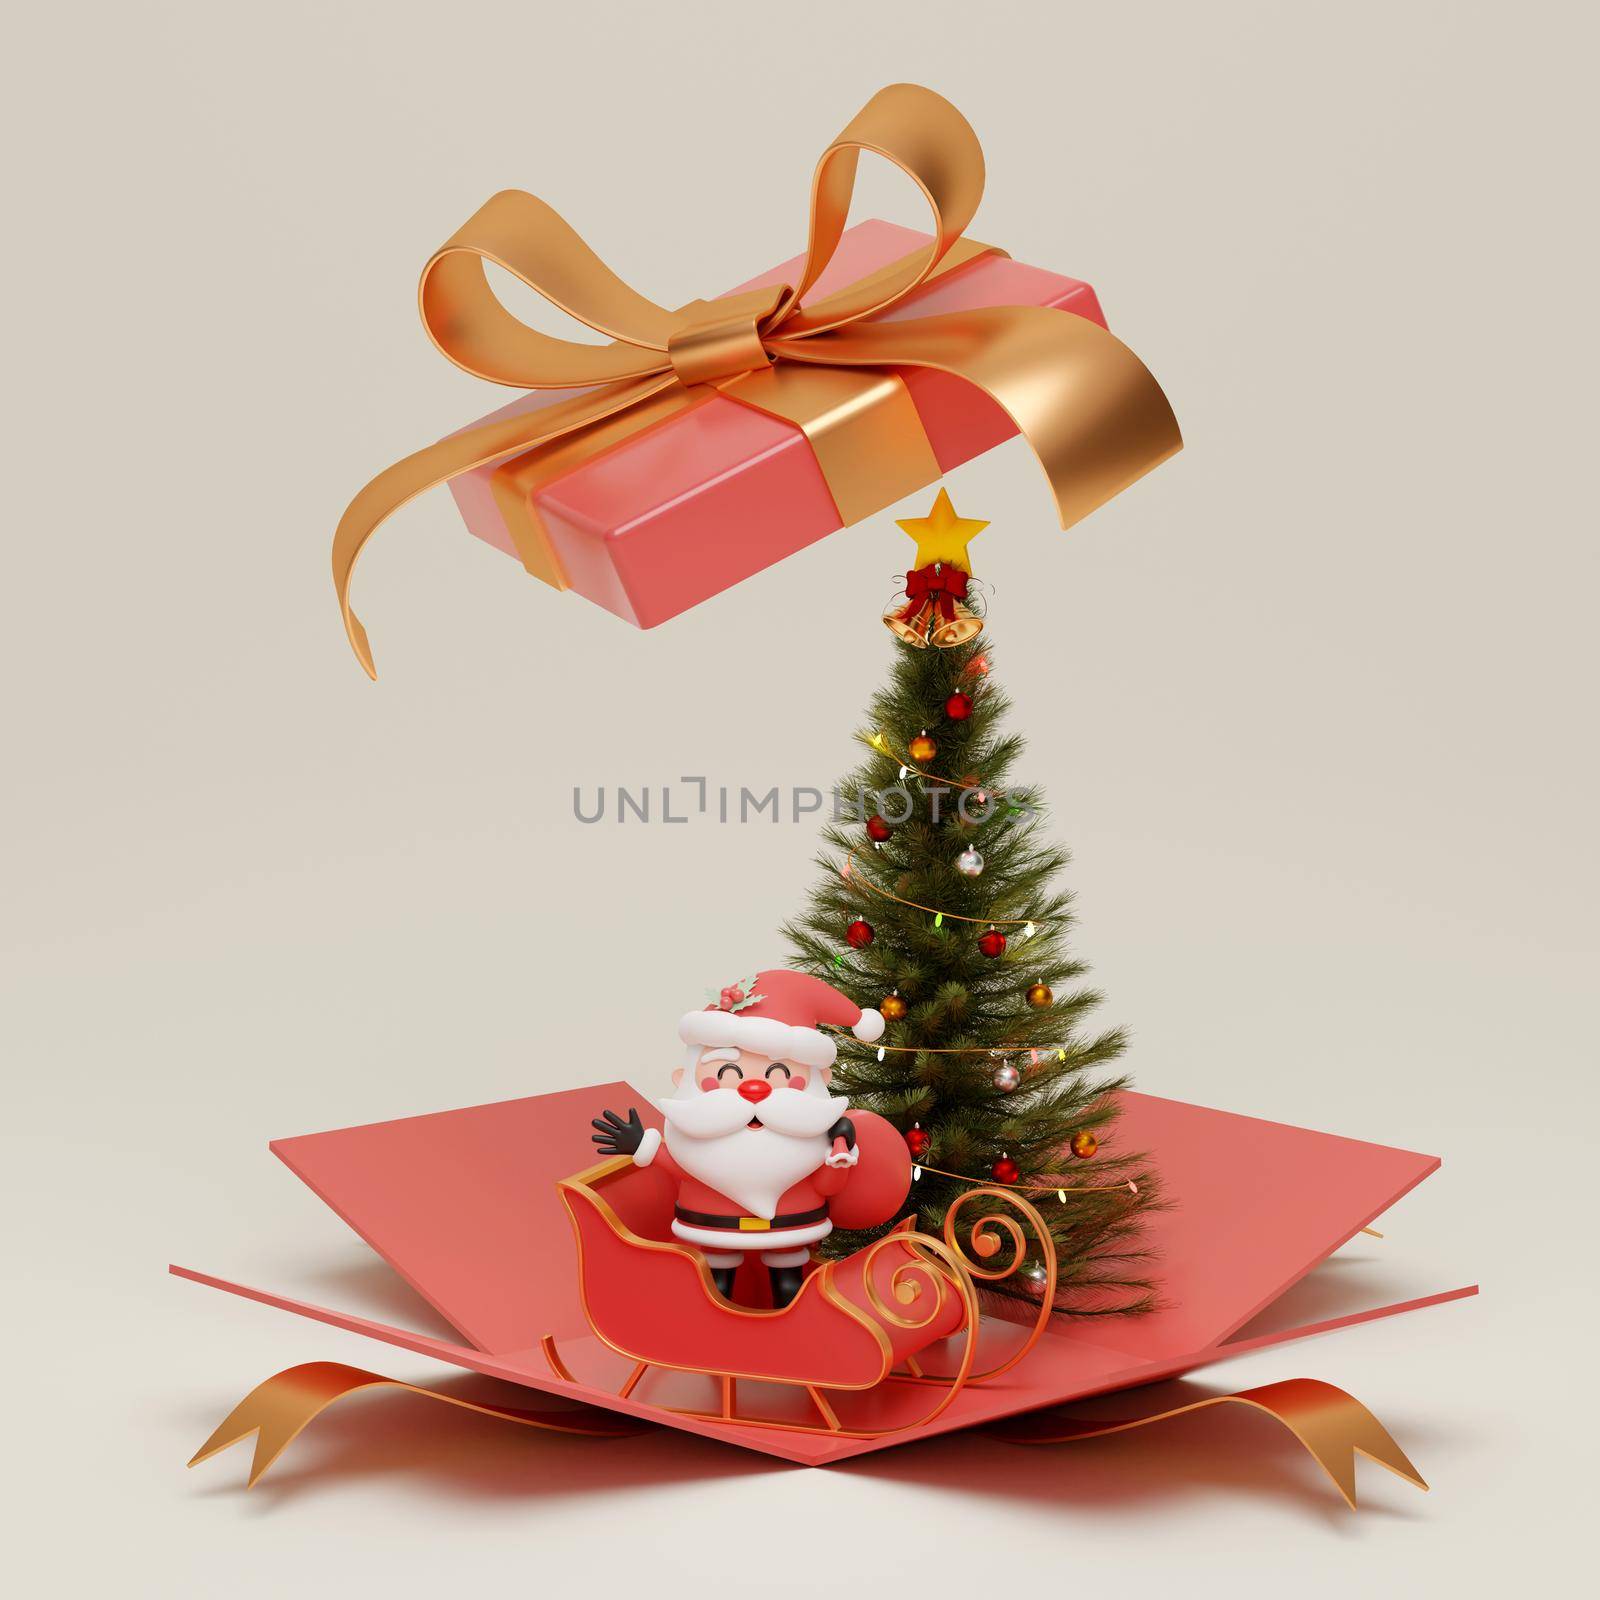 Santa Claus on sleigh with Christmas tree in opened gift box